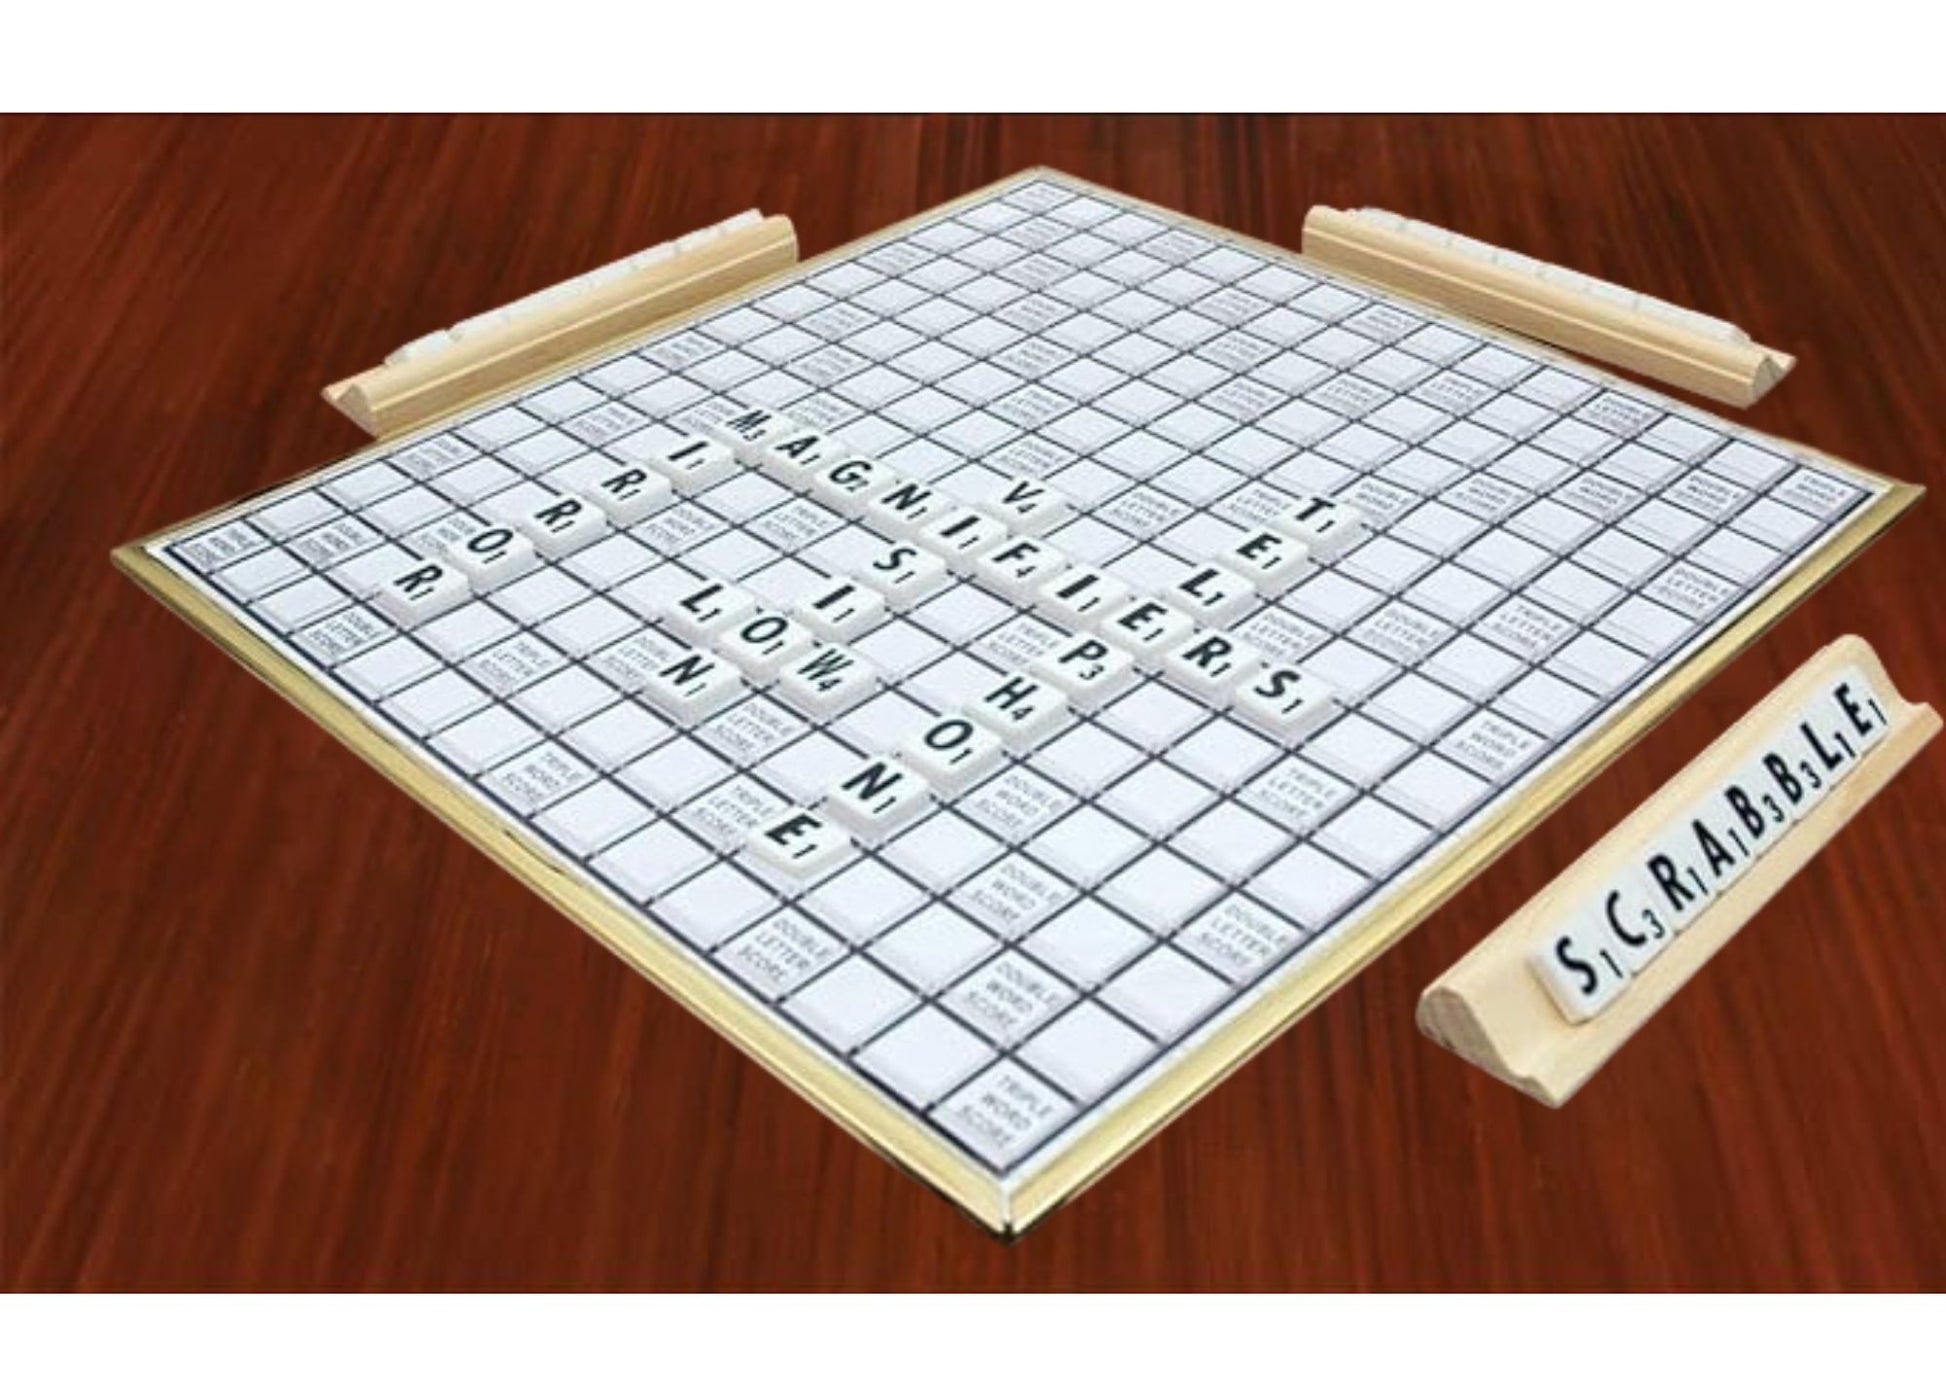 Deluxe Low Vision scrabble board with an ongoing game. Words on the board spell Mirror, Magnifiers, Low, Vision, Telephone. On a Letter holder o the side the letters spell scrabble